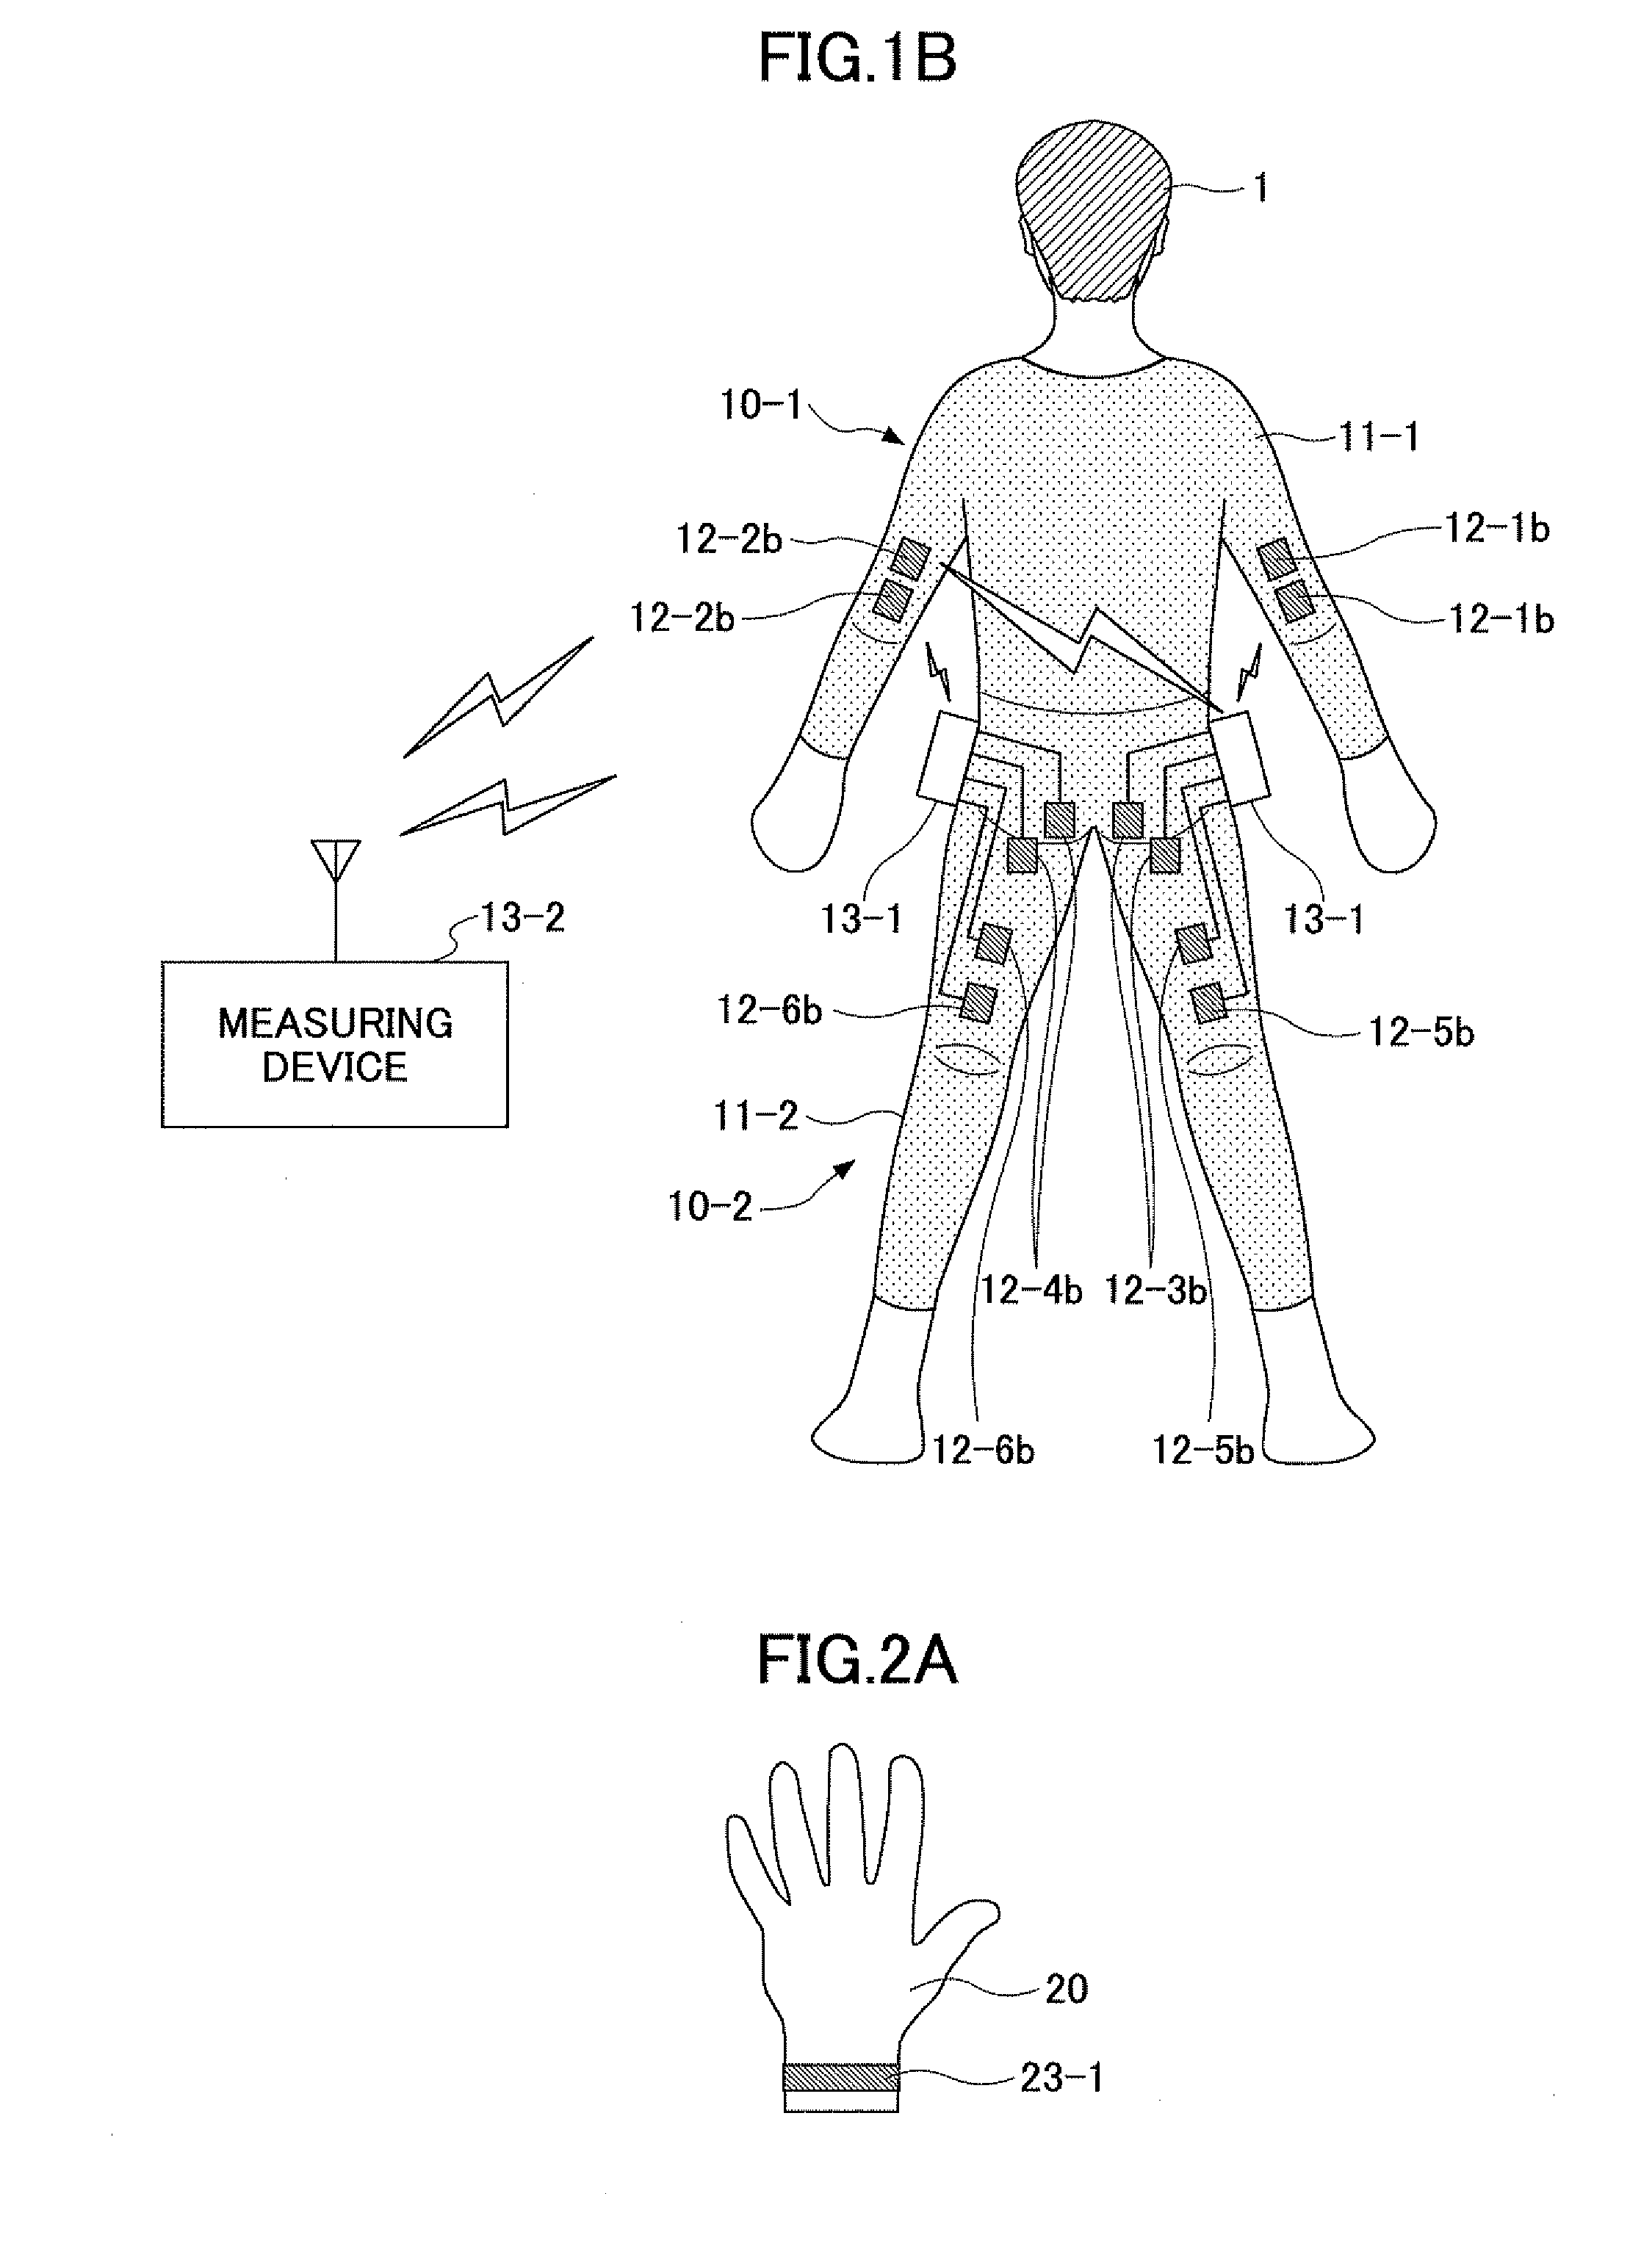 Biological signal measuring wearing device and wearable motion assisting apparatus